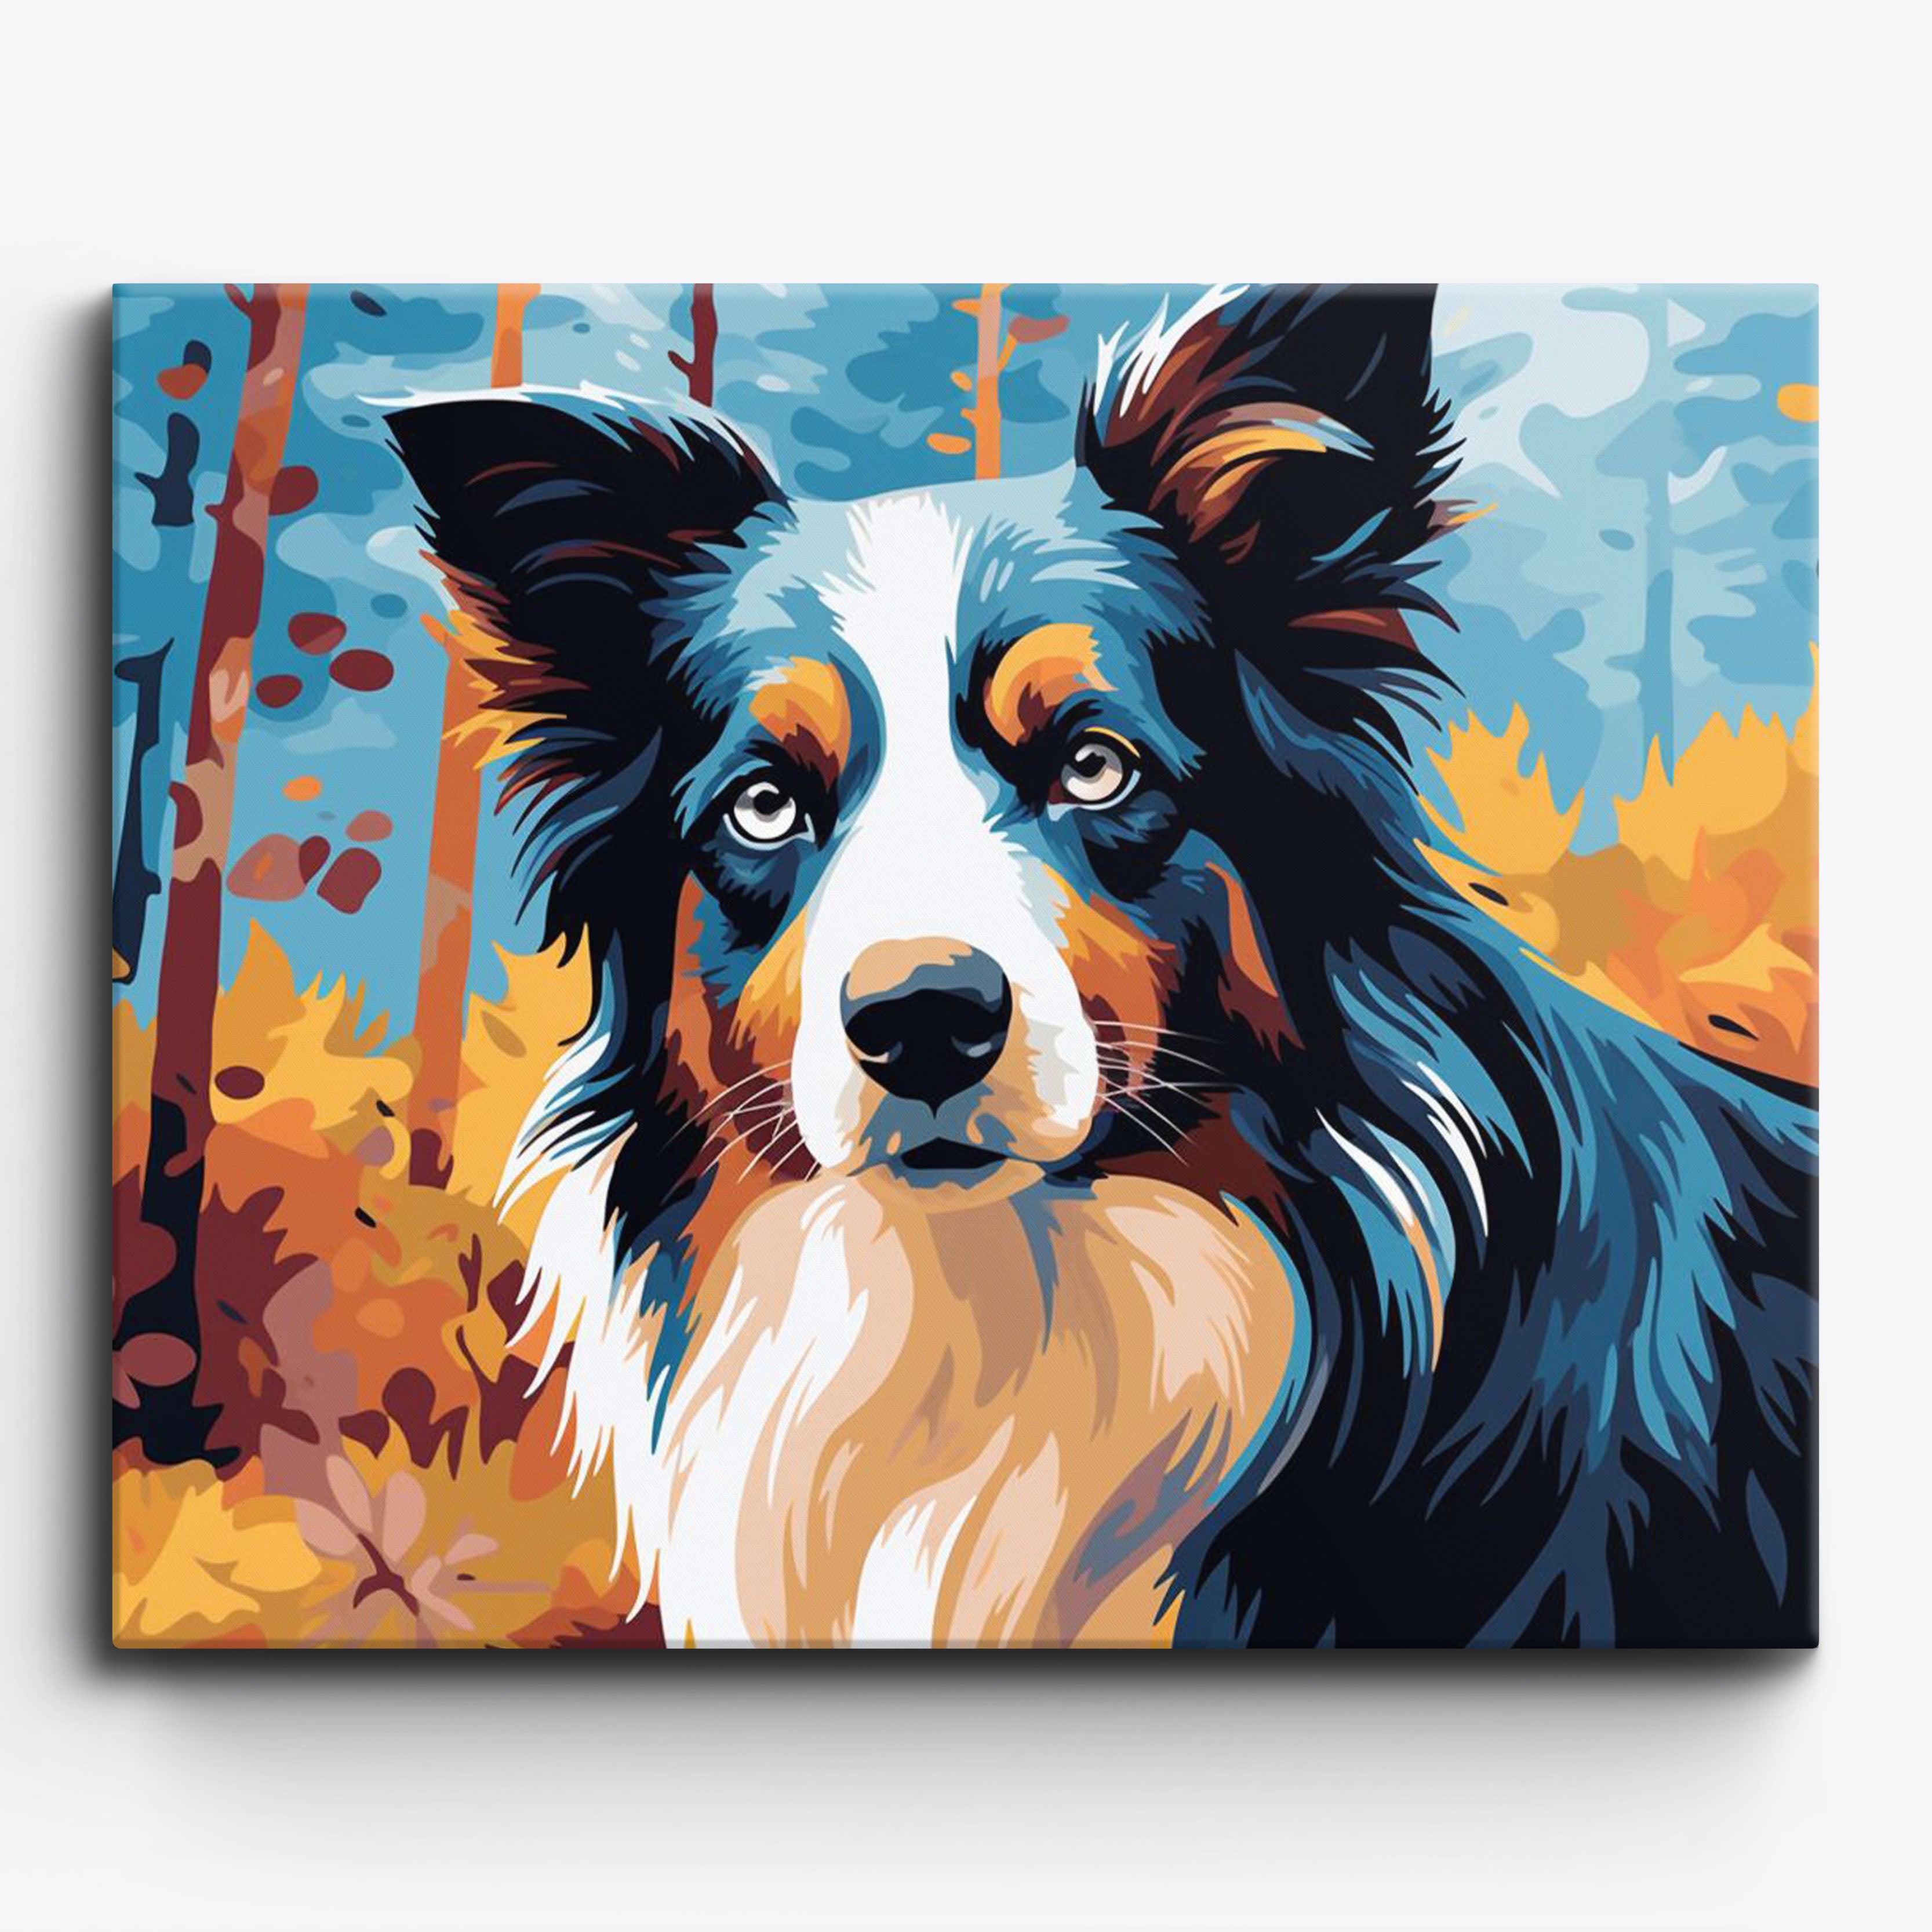  ZMHZMY Paint By Numbers For Kids Ages 8-12 Girls Border  Collie Dog